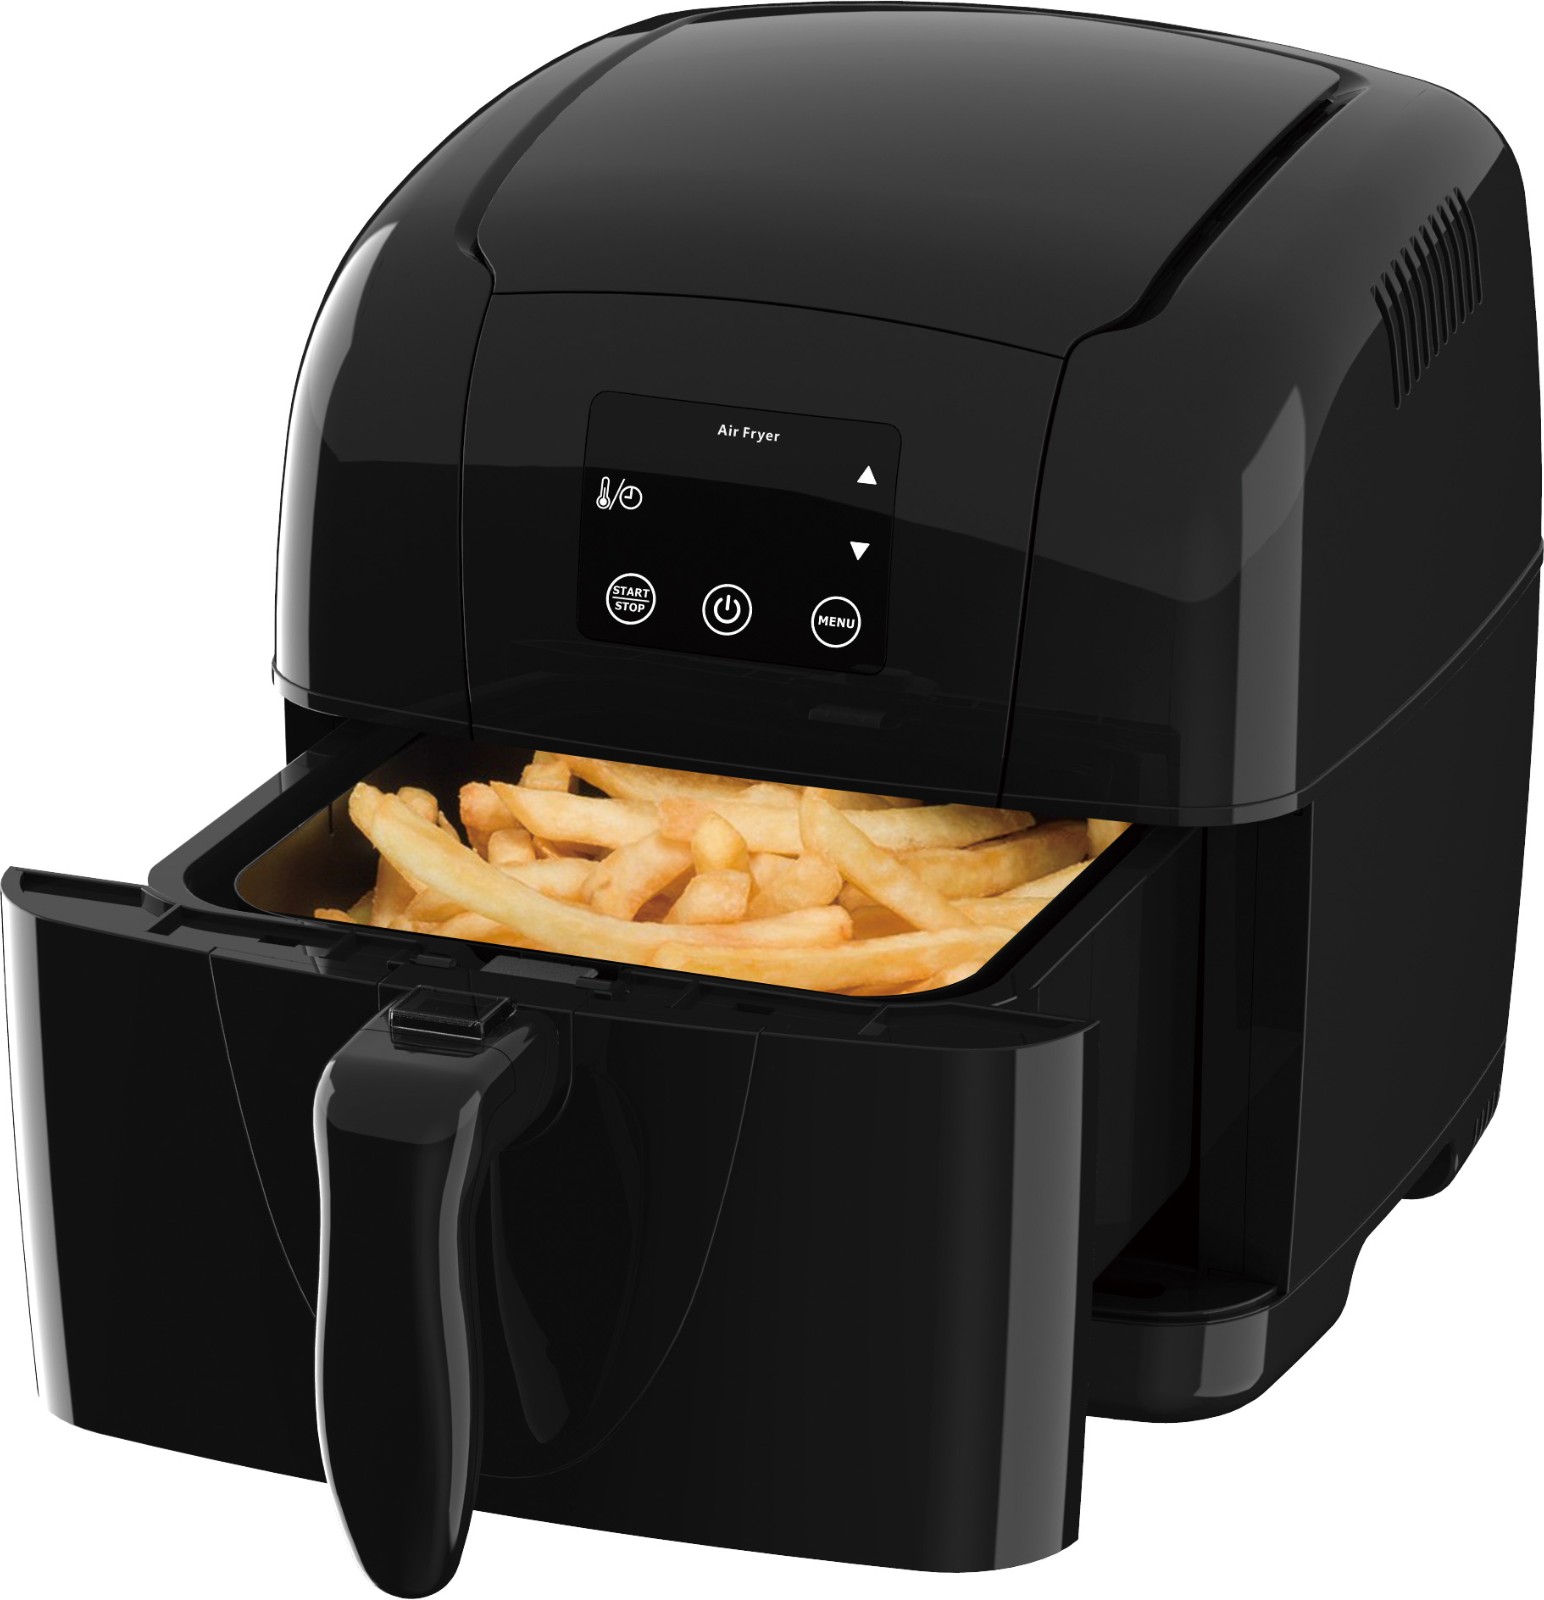 Compact Space saving electric hot air fryer oil-less healthy cooker with frypot & crack